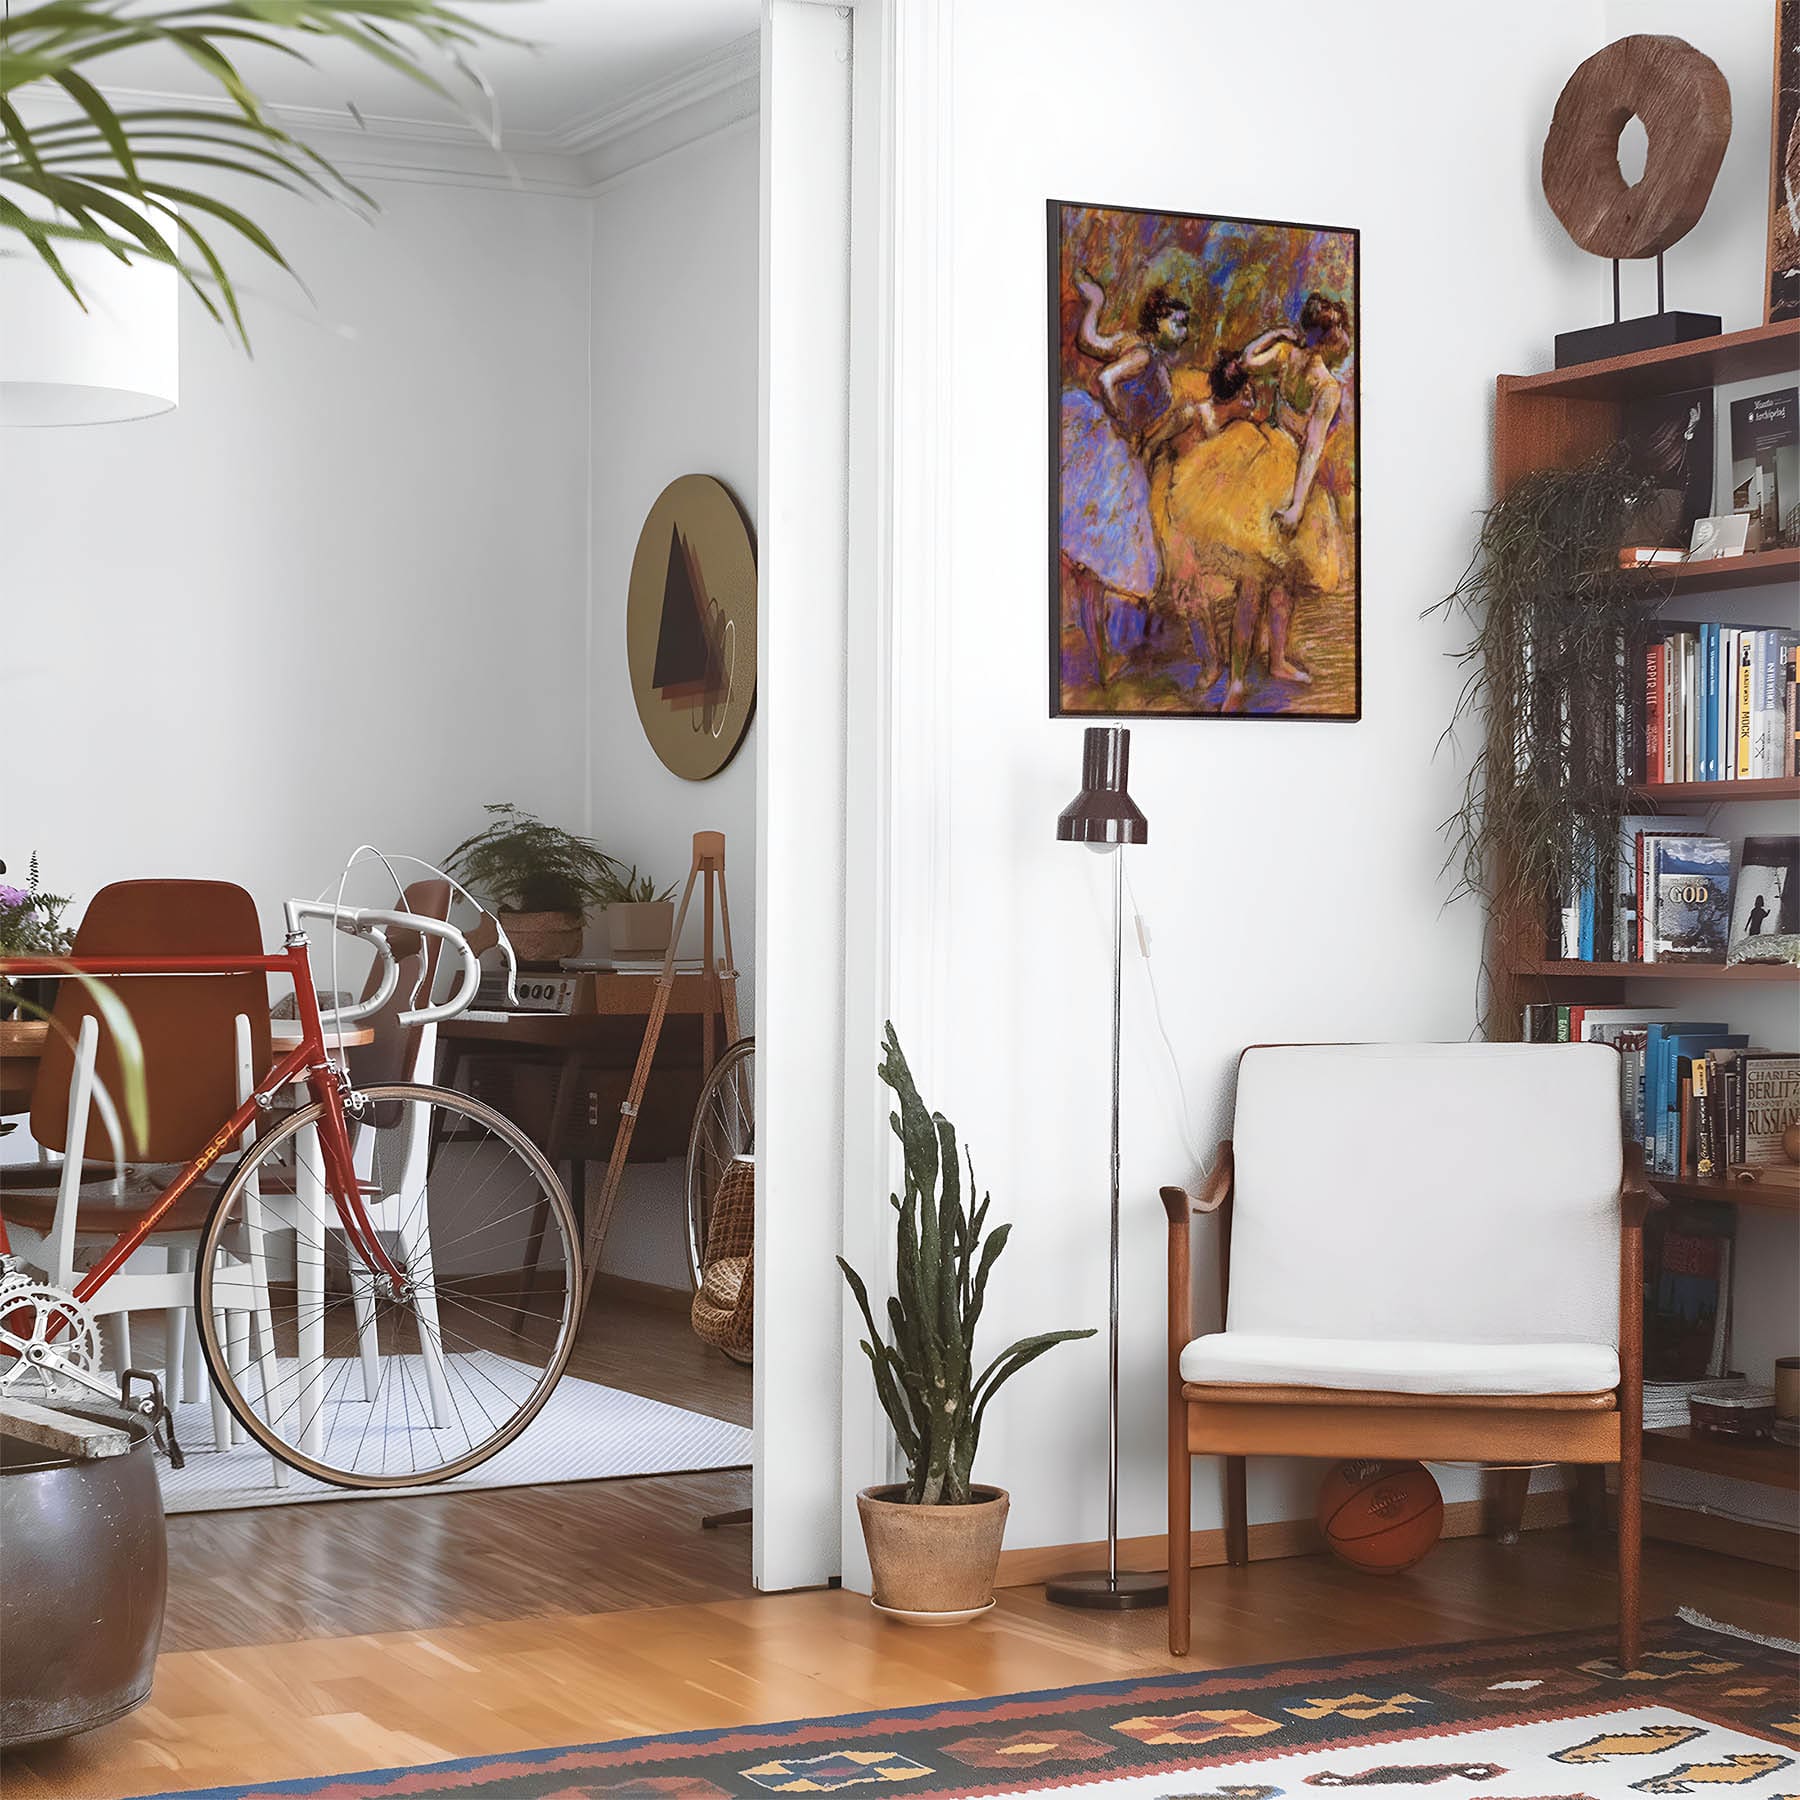 Eclectic living room with a road bike, bookshelf and house plants that features framed artwork of a Dancers in Yellow and Violet above a chair and lamp